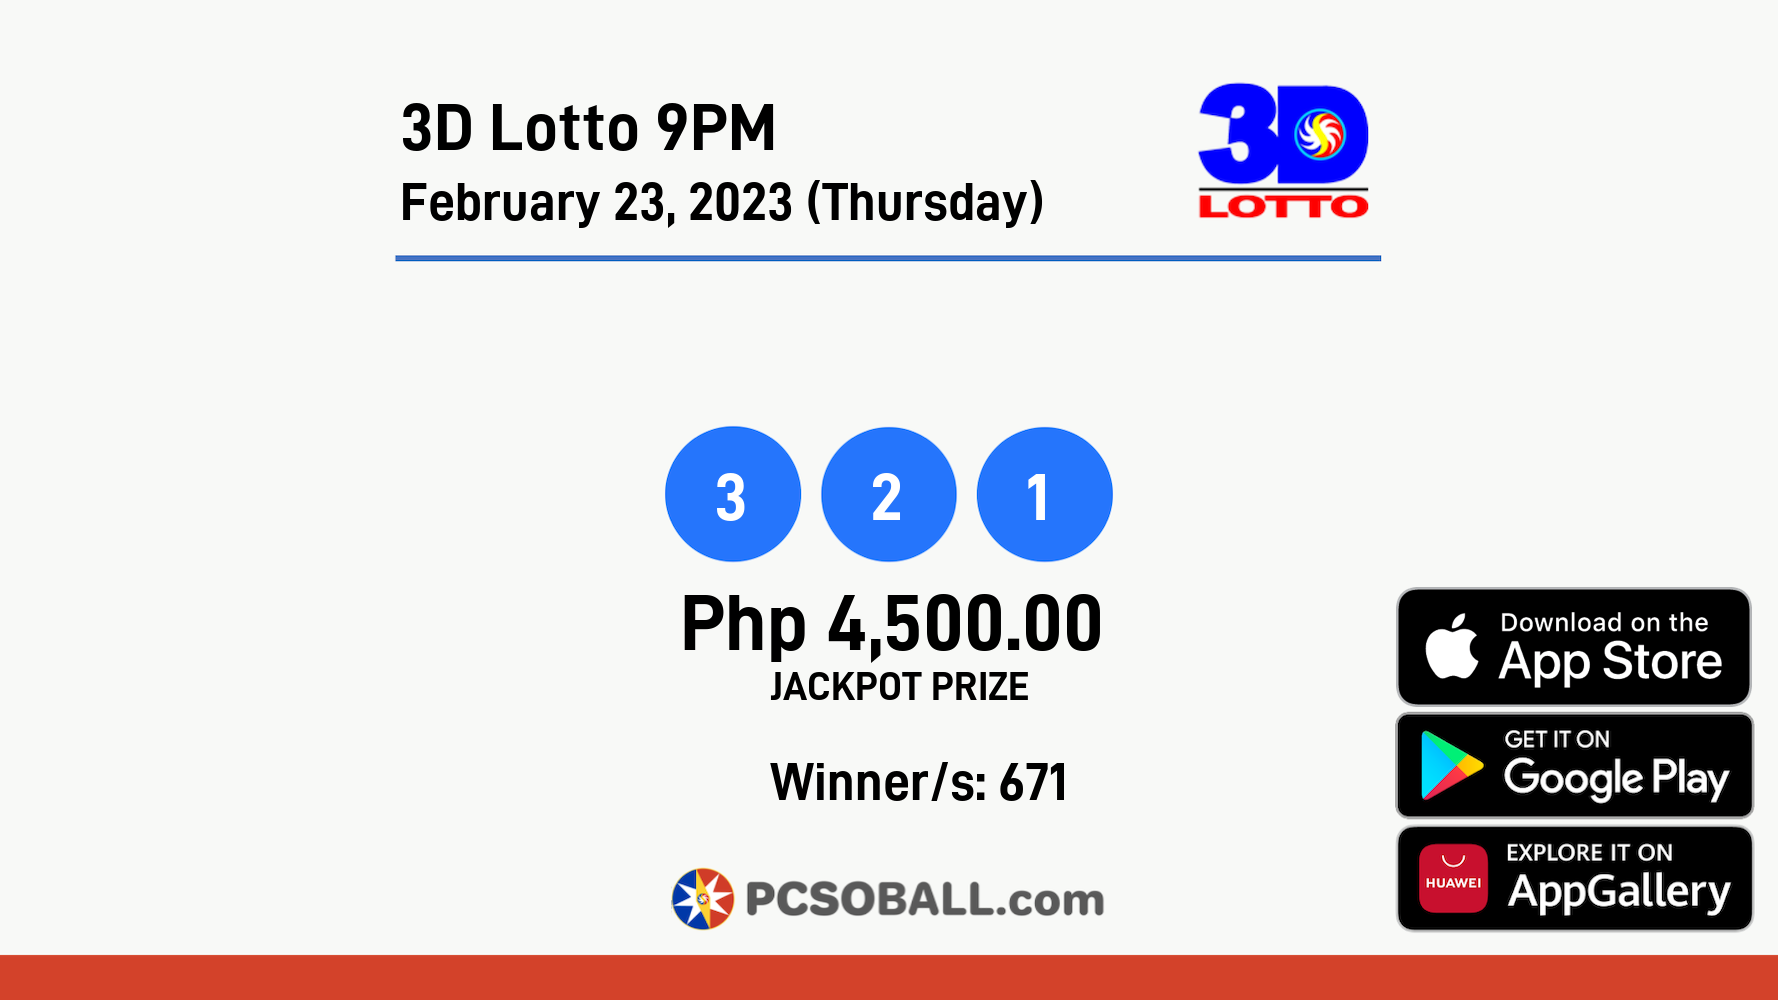 3D Lotto 9PM February 23, 2023 (Thursday) Result